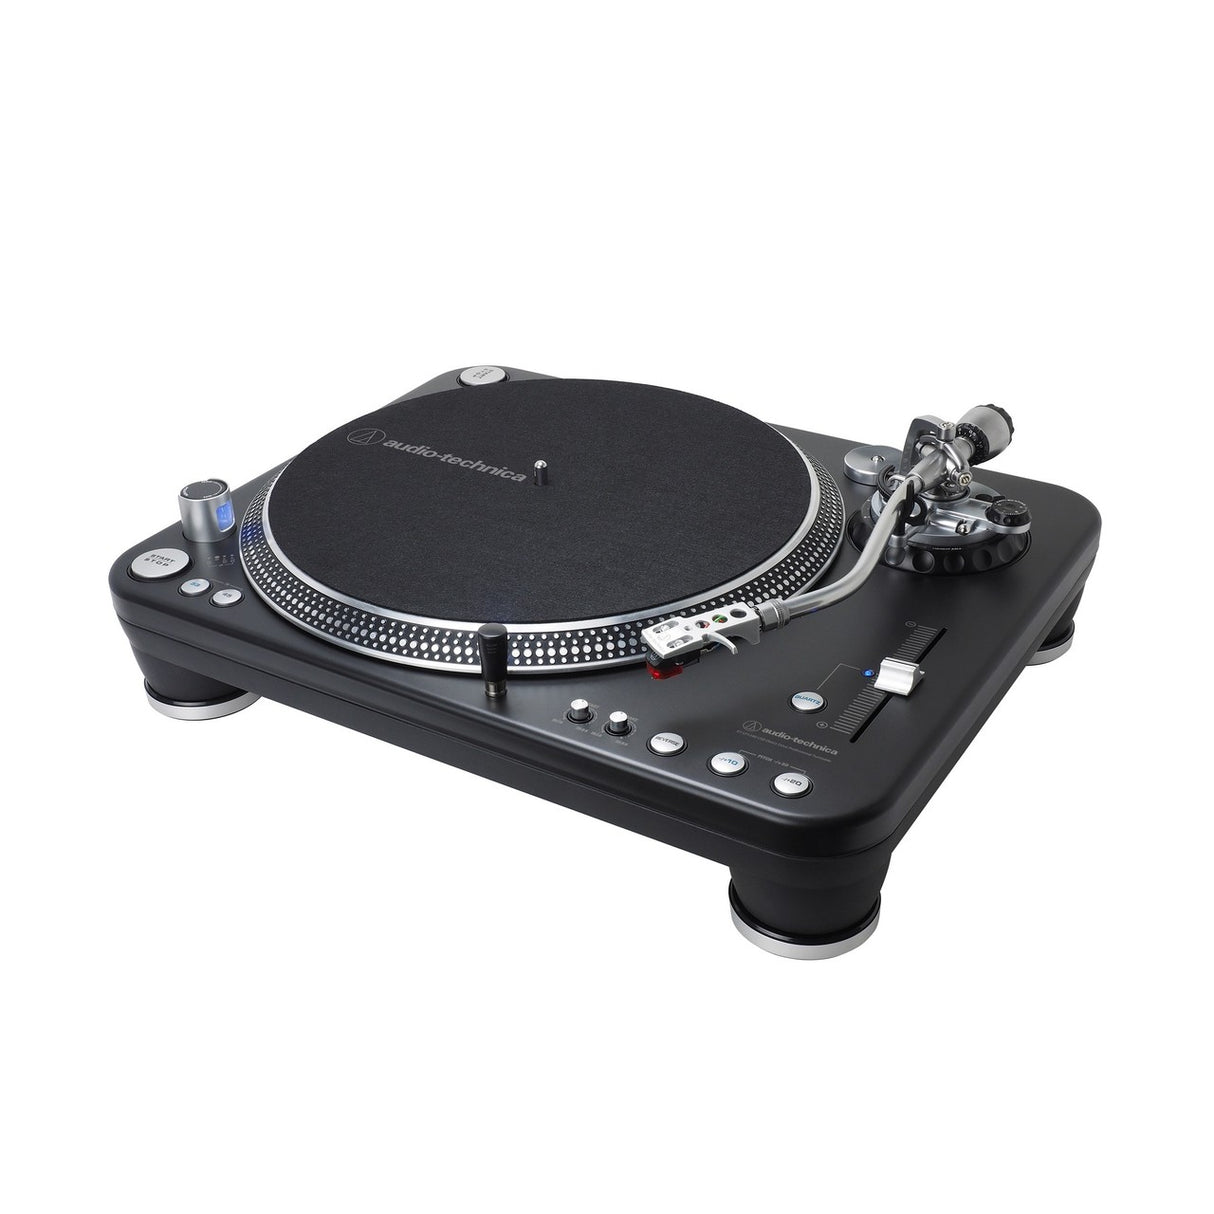 Audio Technica AT-LP1240-USBXP | Direct Drive Professional USB and Analog DJ Turntable